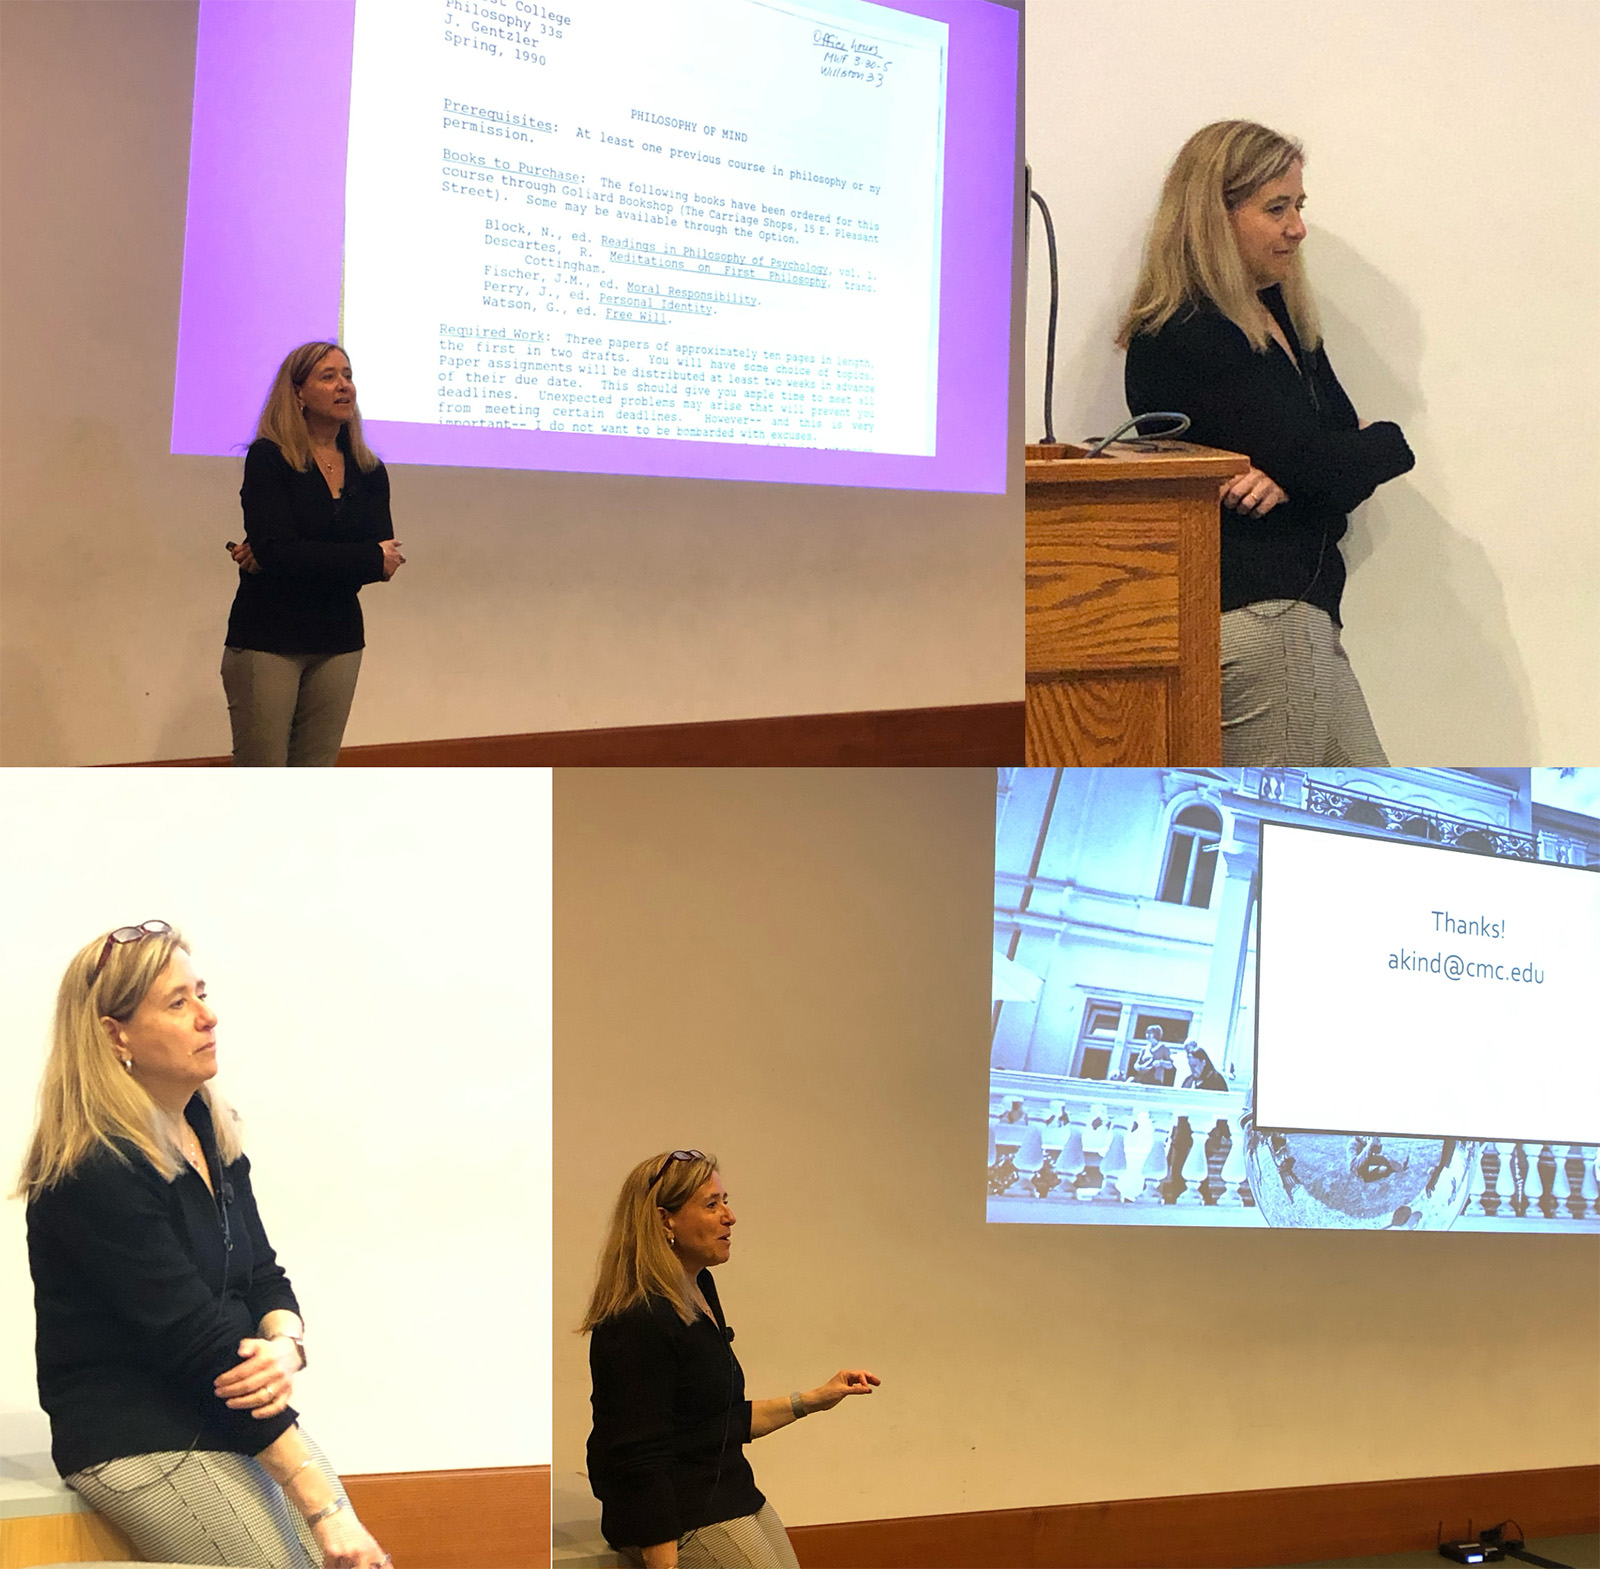 Four photos of a woman giving a lecture in front of a large video screen